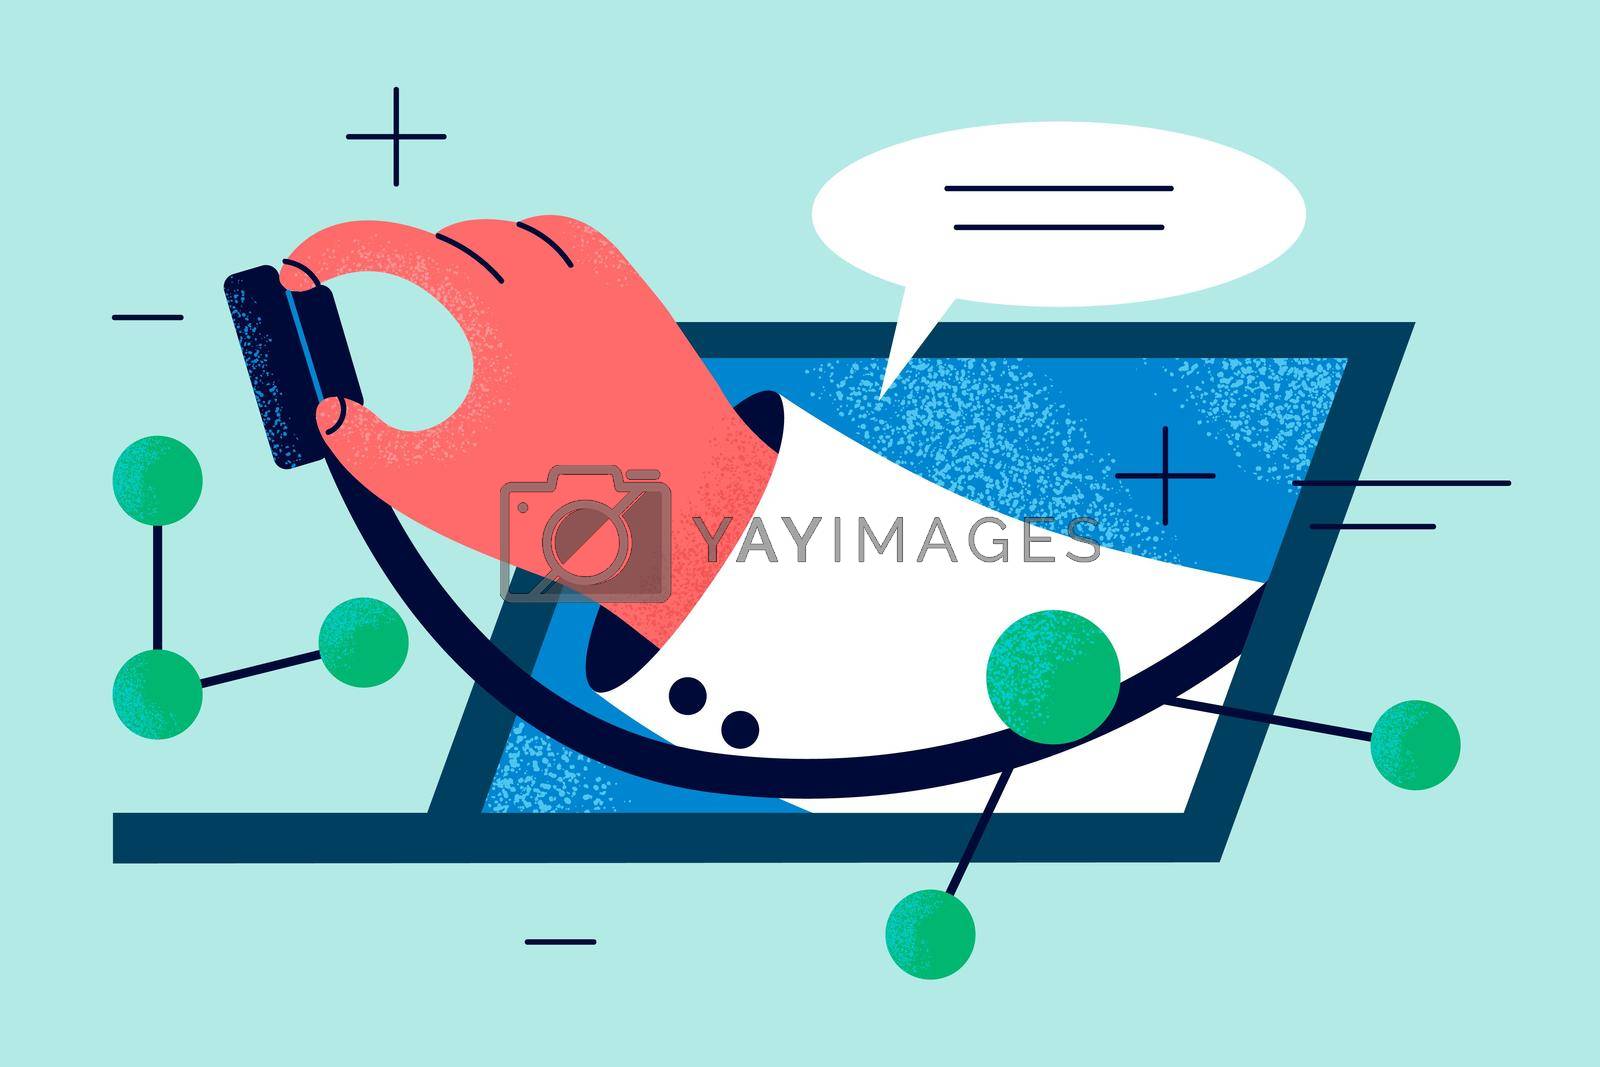 Online doctor, telemedicine, Virtual healthcare concept. Hand of doctor with stethoscope protruding from laptop screen to examine remote patient and make online consultation illustration